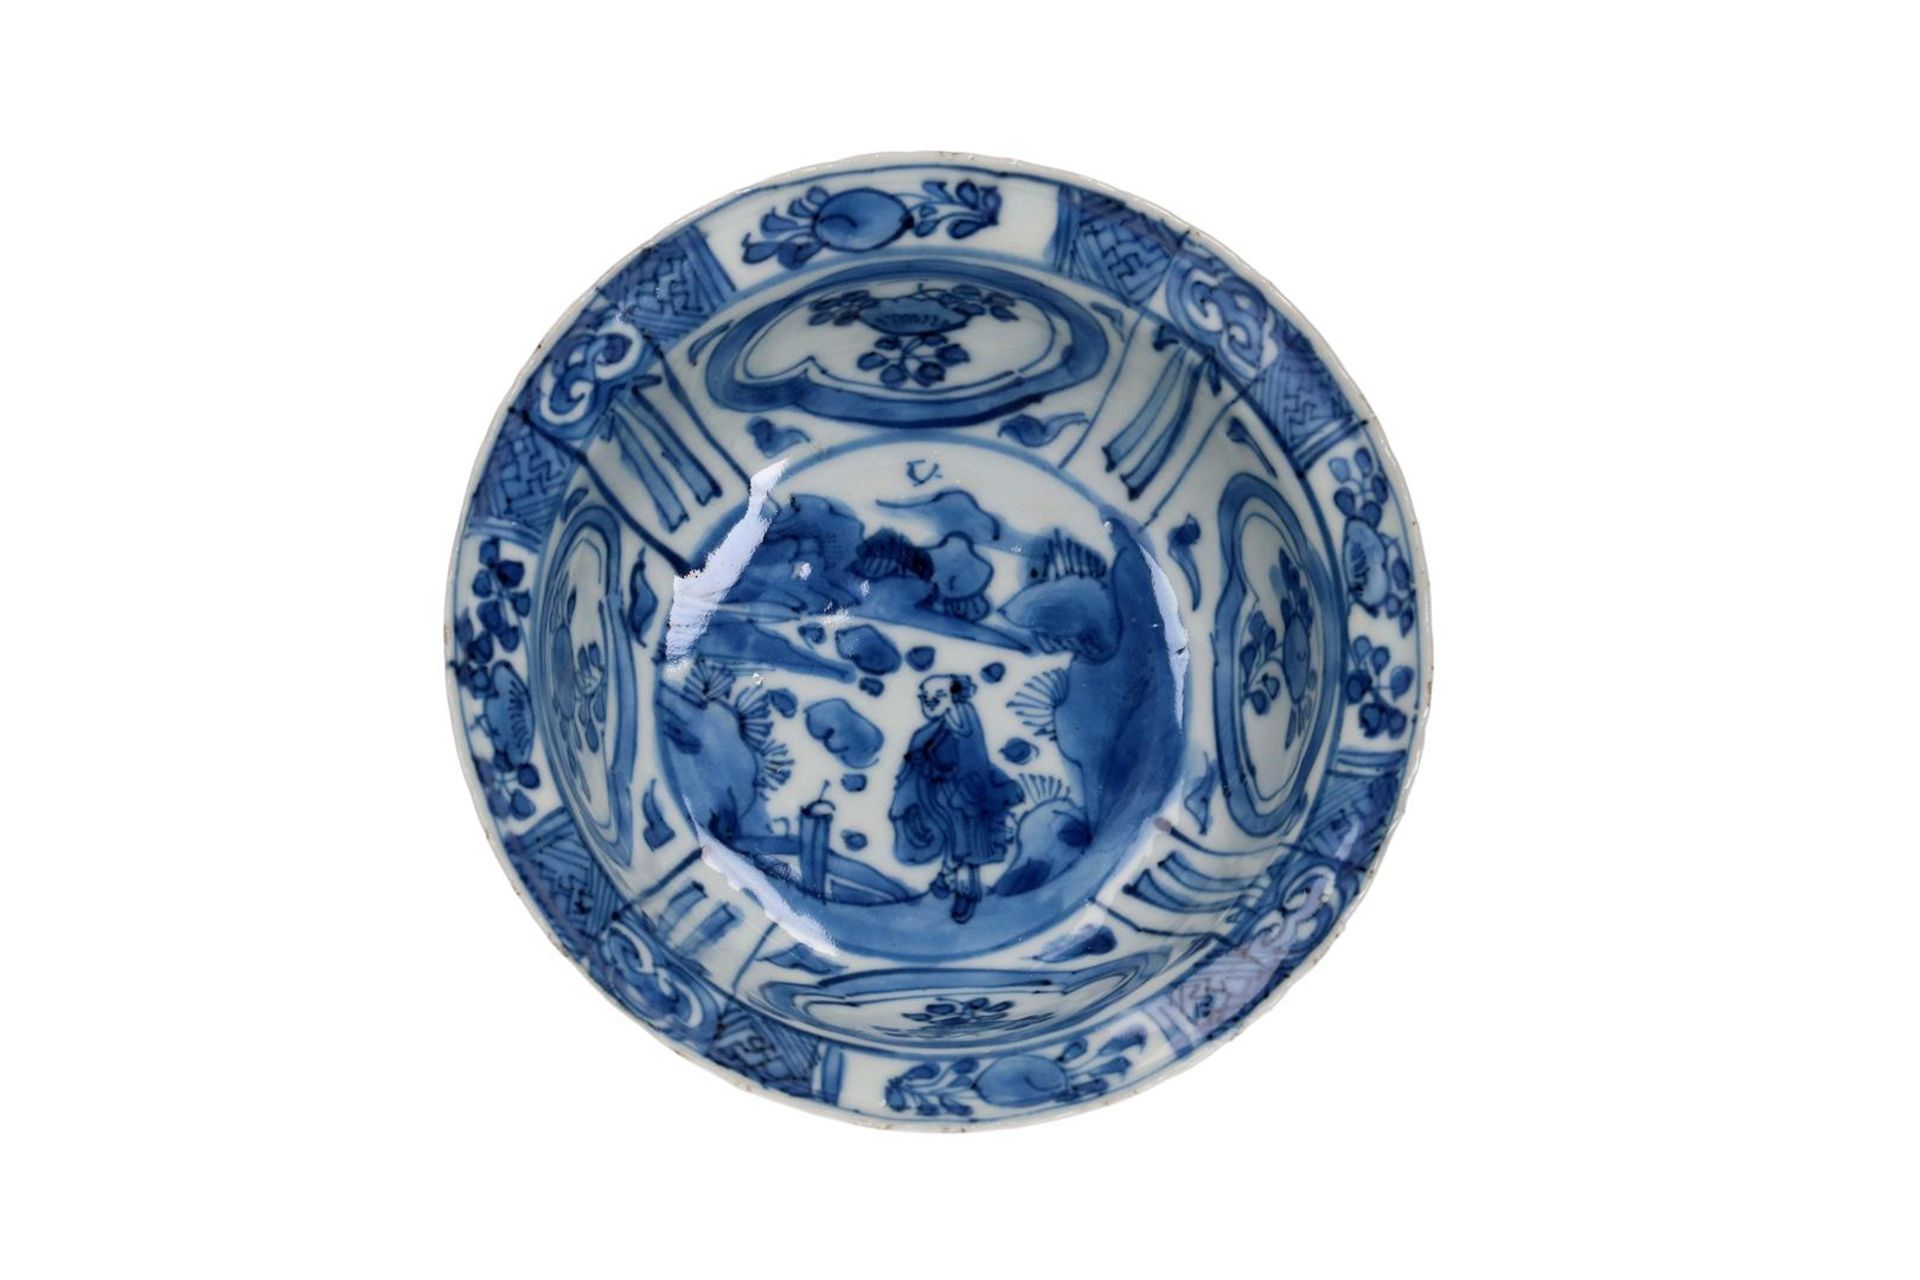 A blue and white 'kraak' porcelain 'klapmuts' bowl with a scalloped rim, decorated with a figure